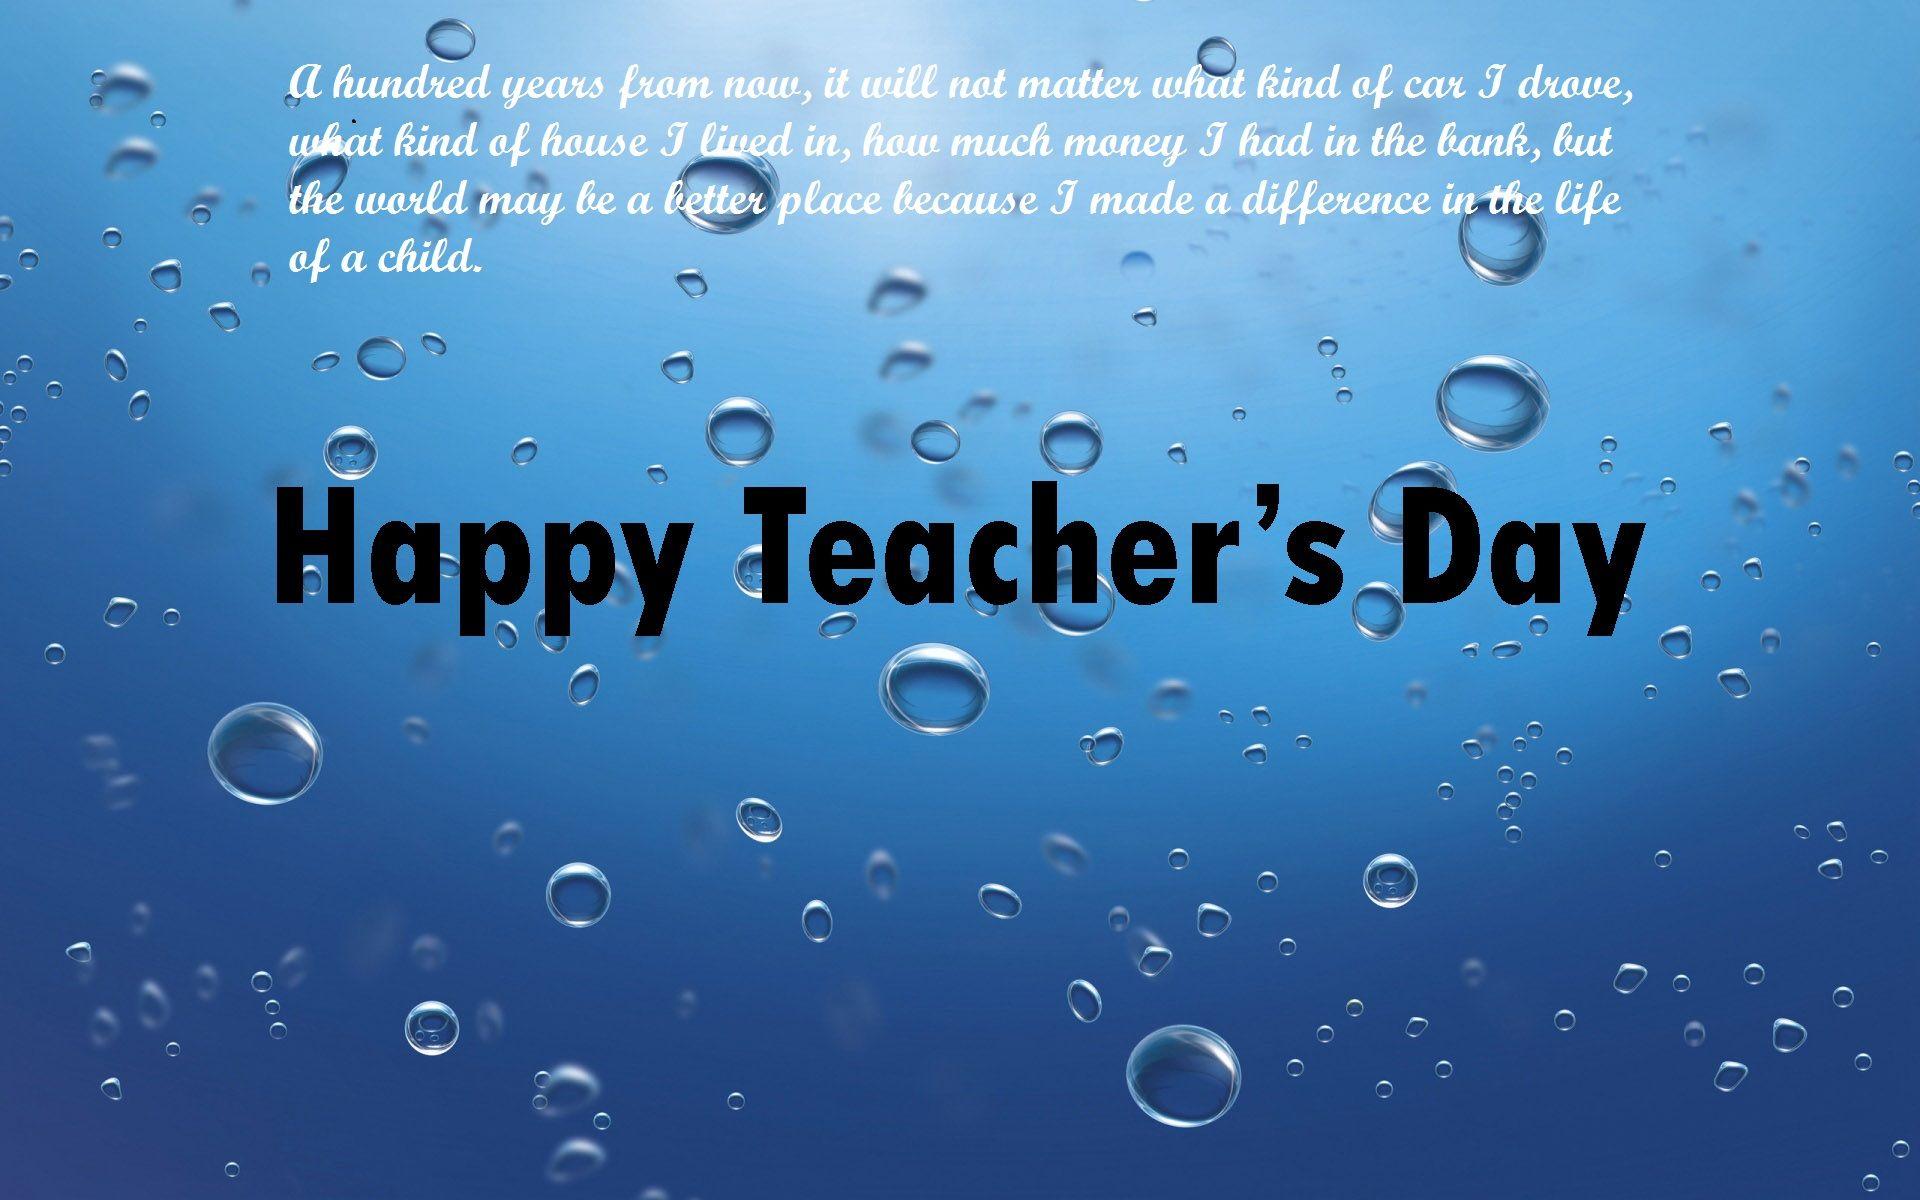 2017} Happy Teachers Day HD Image, Wallpaper, Pics, and Photo